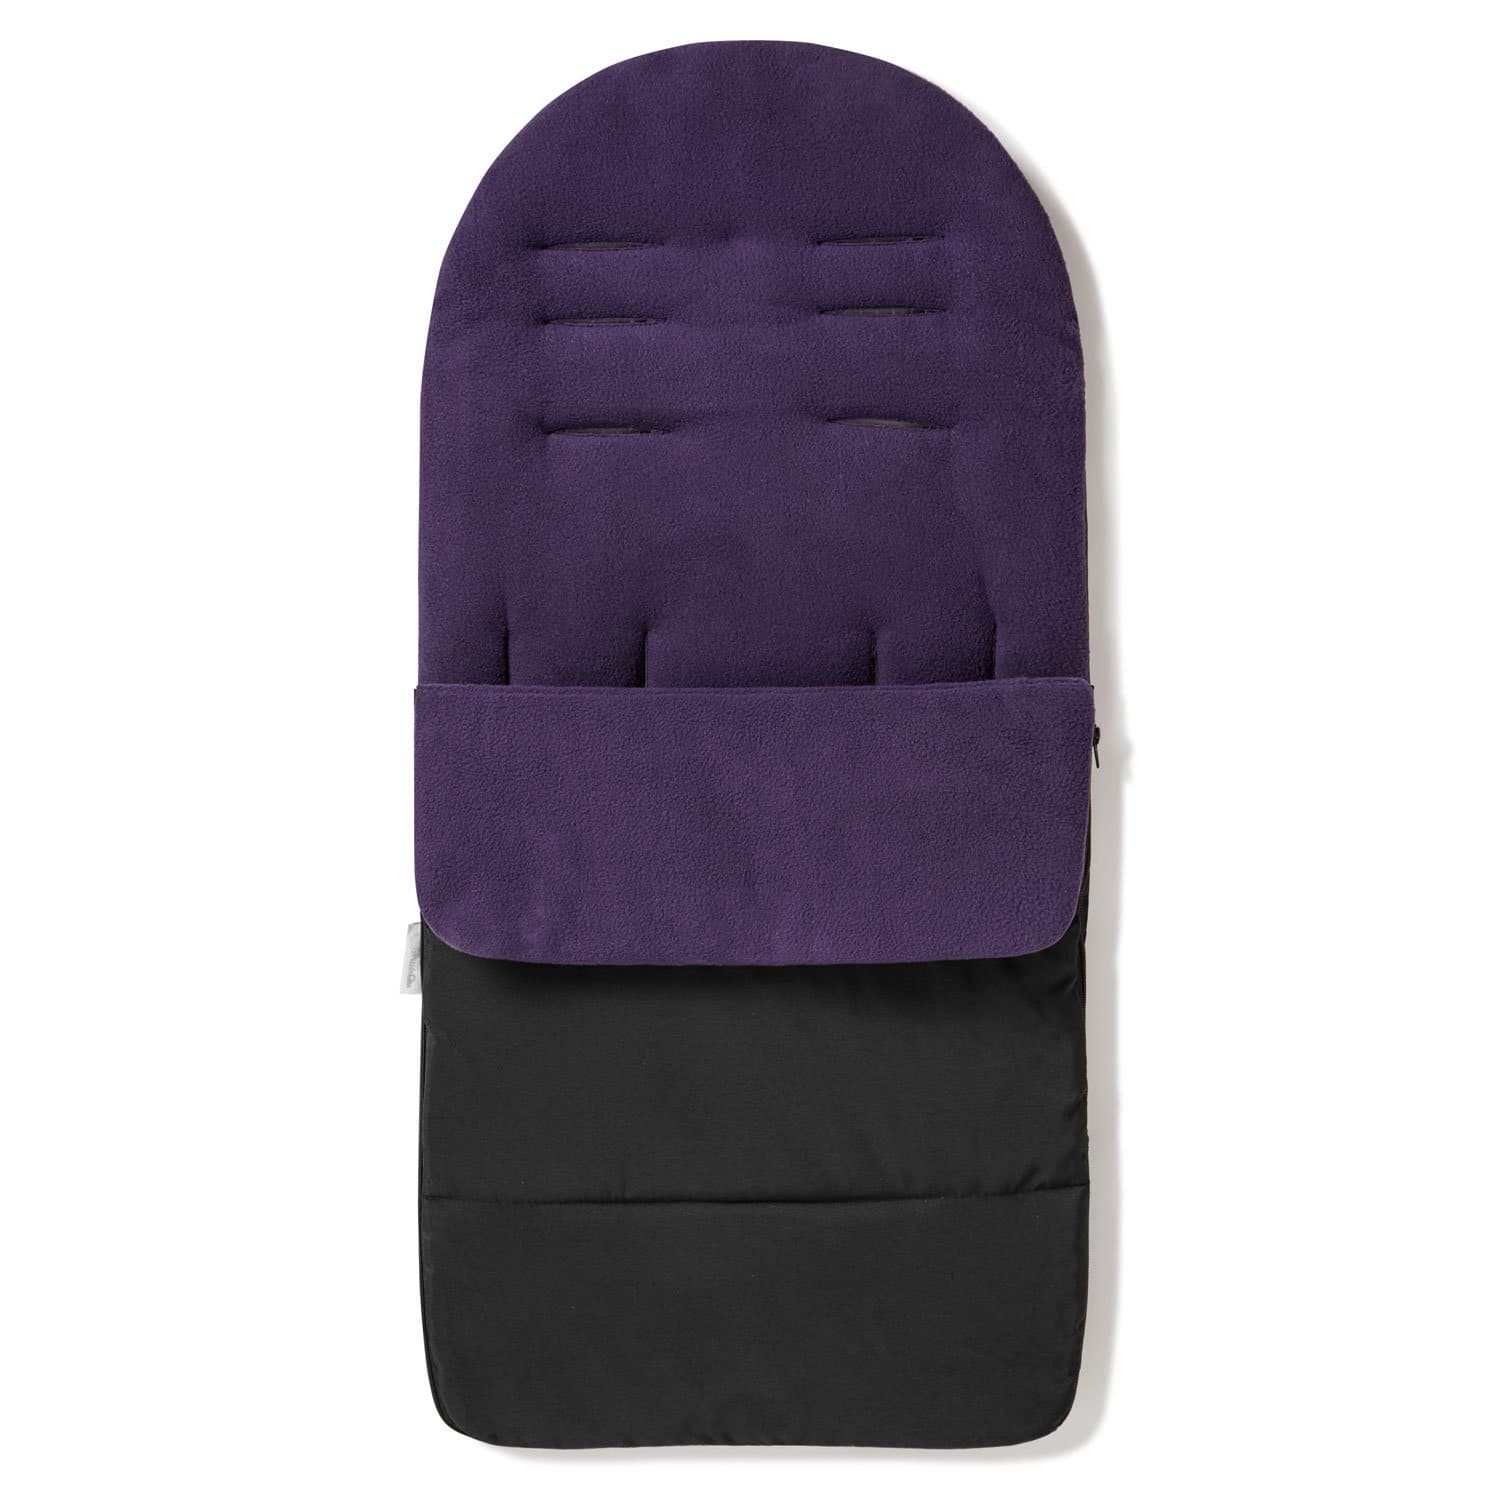 Premium Footmuff / Cosy Toes Compatible with iCandy - Plum Purple / Fits All Models | For Your Little One